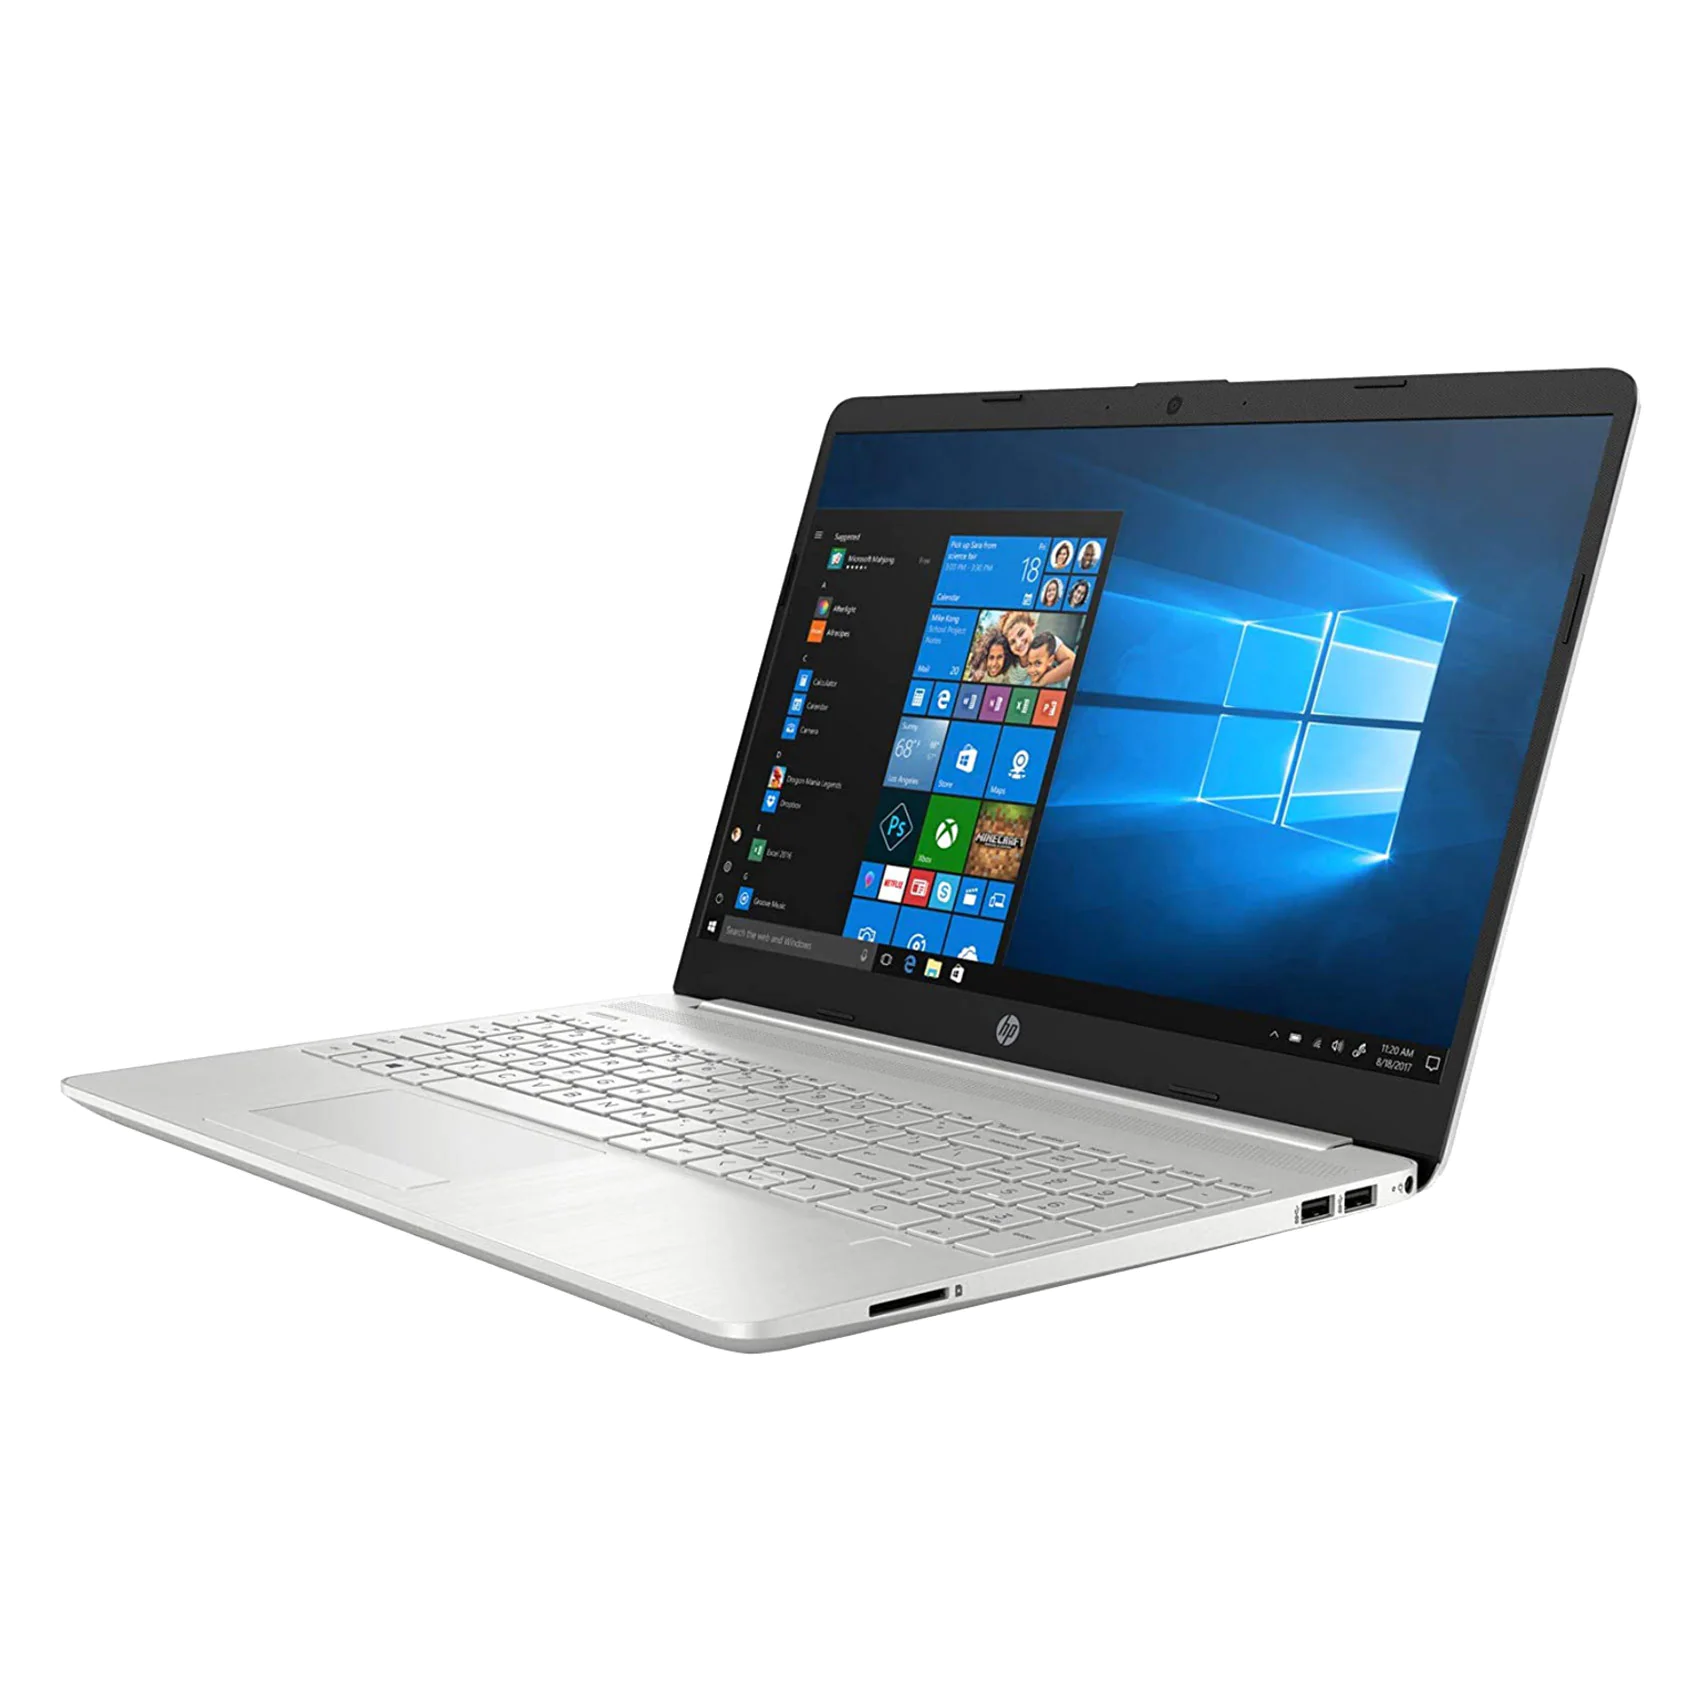 Laptops Promotions offer - in Amman #2072 - 1  image 